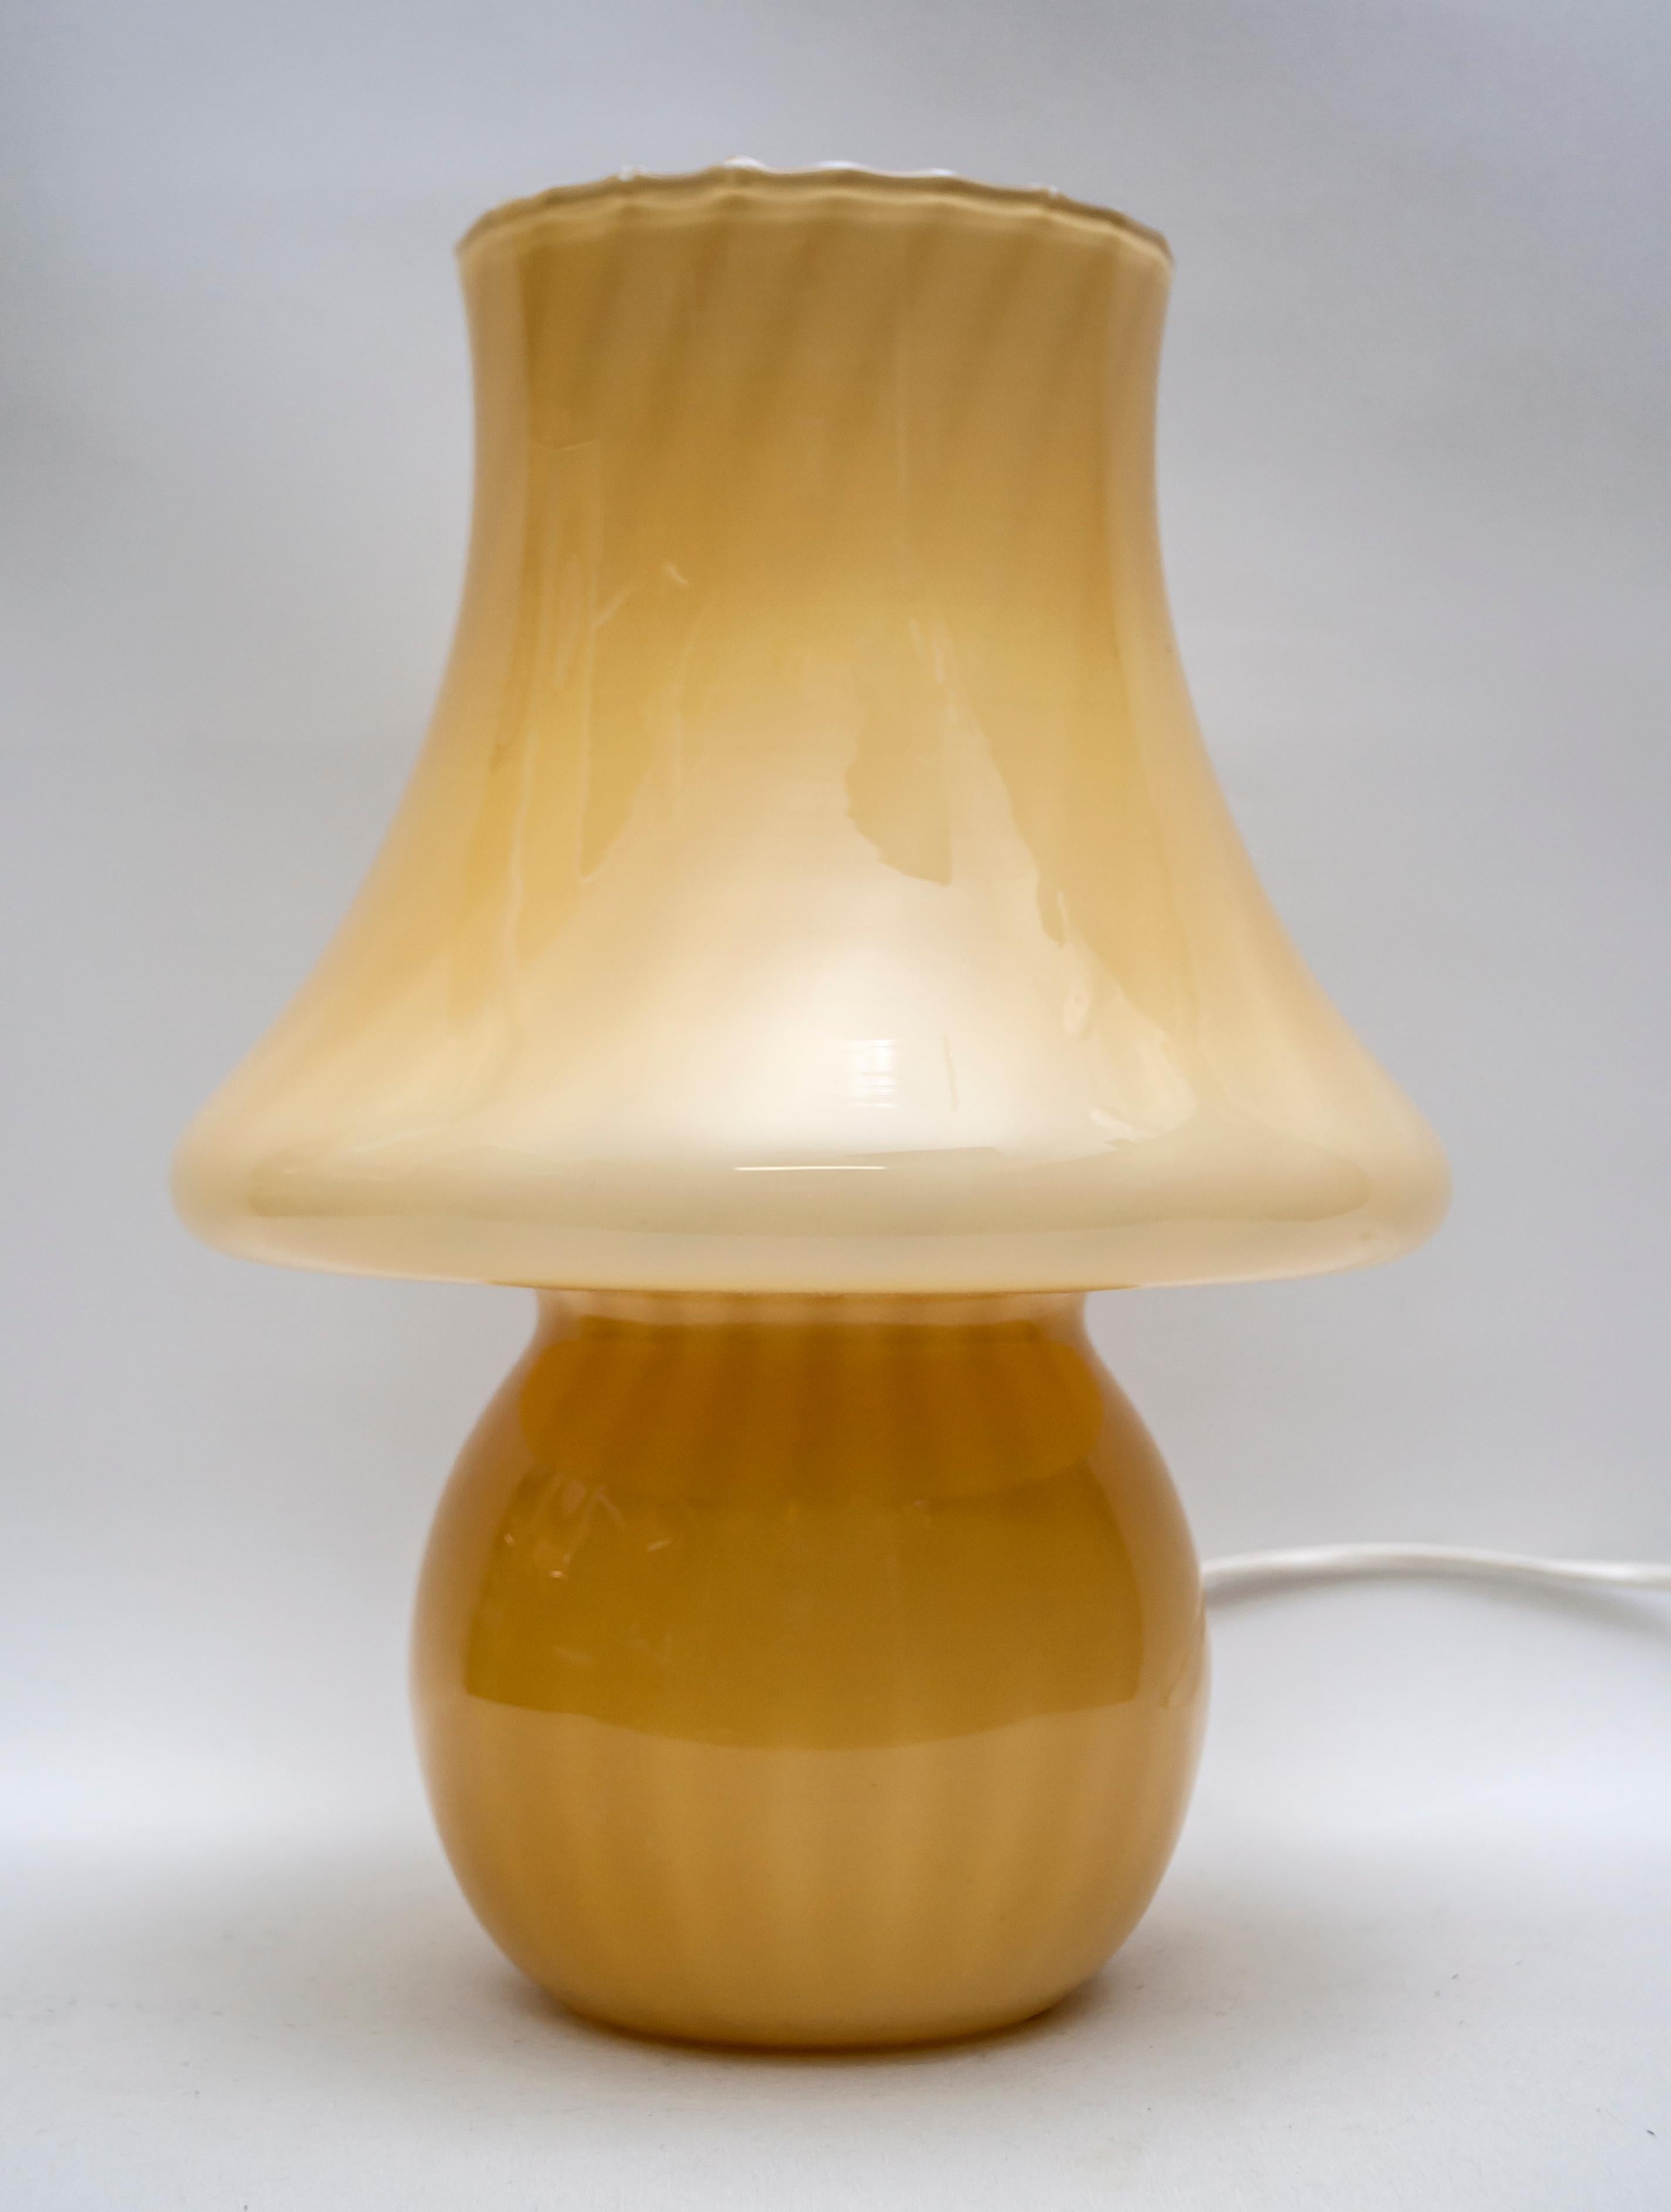 This mushroom lamp in Murano glass was produced by Venini in the 1970s.

For over ninety years the Venini brand has been characterized by craftsmanship and tradition in the international glass objects market. The first artistic director Vittorio